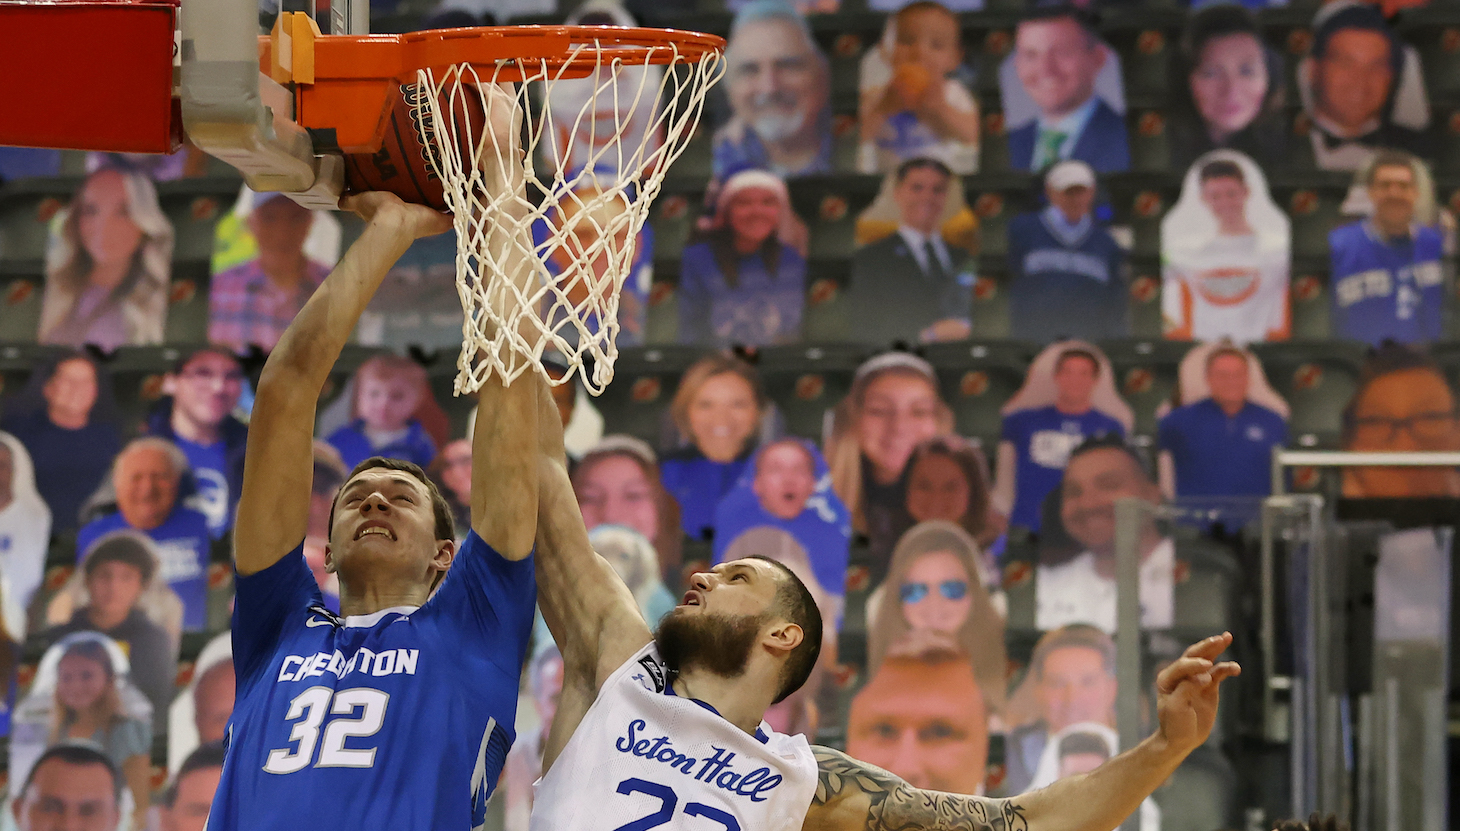 NEWARK, NJ - JANUARY 27: Sandro Mamukelashvili #23 of the Seton Hall Pirates blocks a shot by Ryan Kalkbrenner #32 of the Creighton Bluejays during the first half of an NCAA college basketball game at Prudential Center on January 27, 2021 in Newark, New Jersey. (Photo by Rich Schultz/Getty Images)